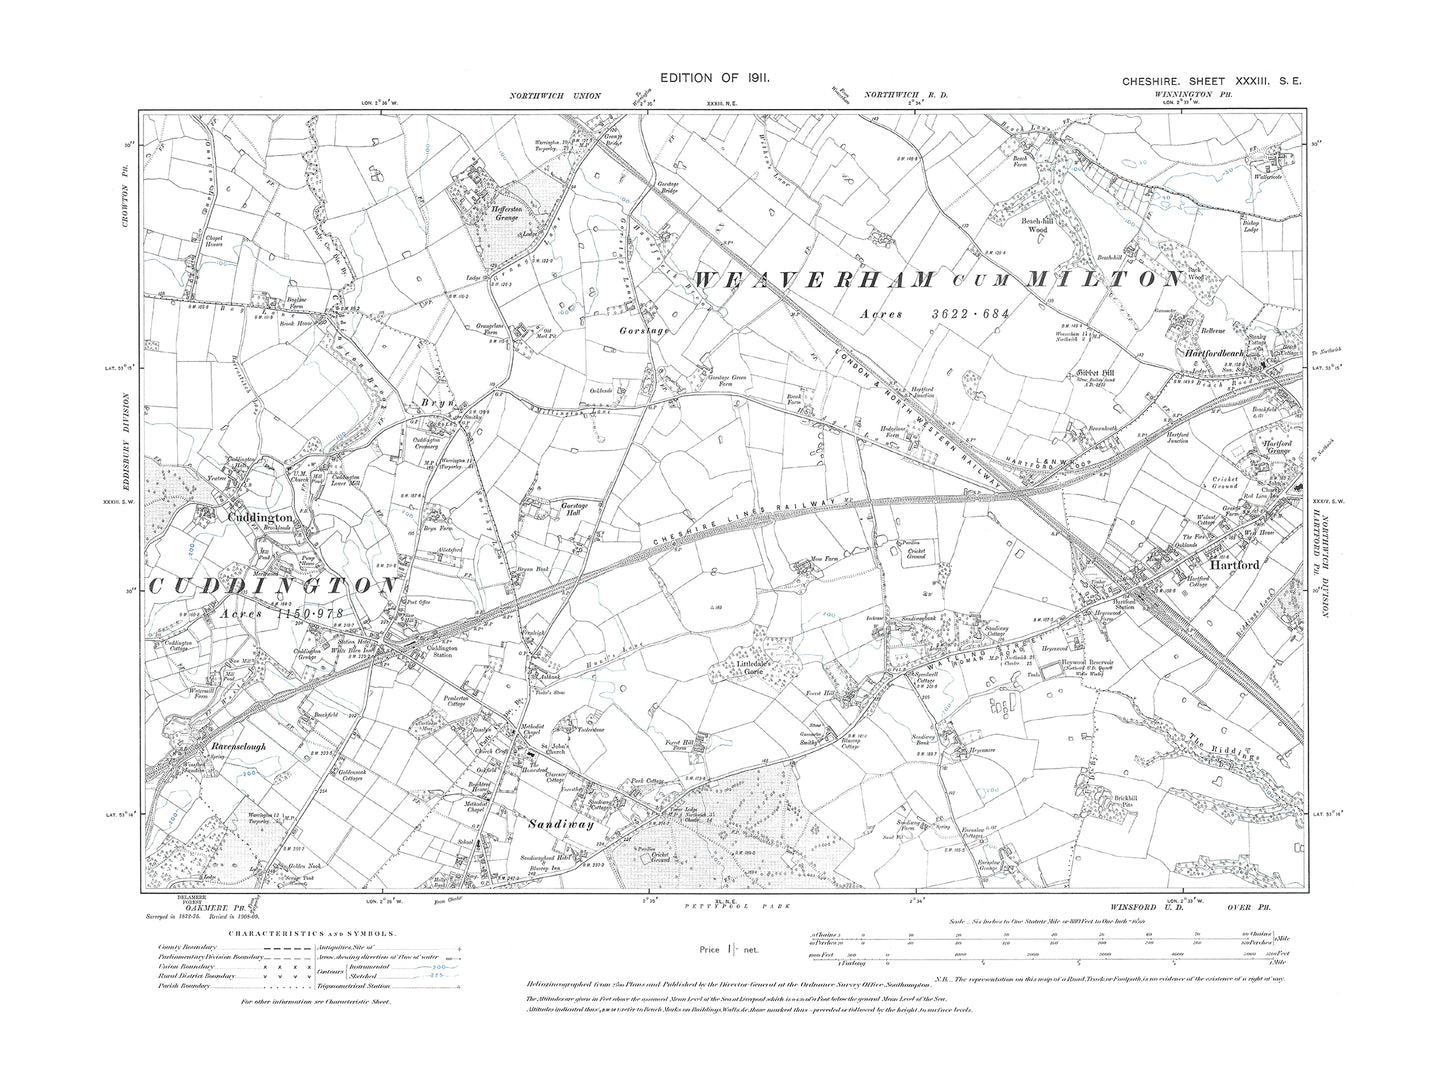 Old OS map dated 1911, showing Cuddington, Sandiway, Hartford (west) in Cheshire 33SE